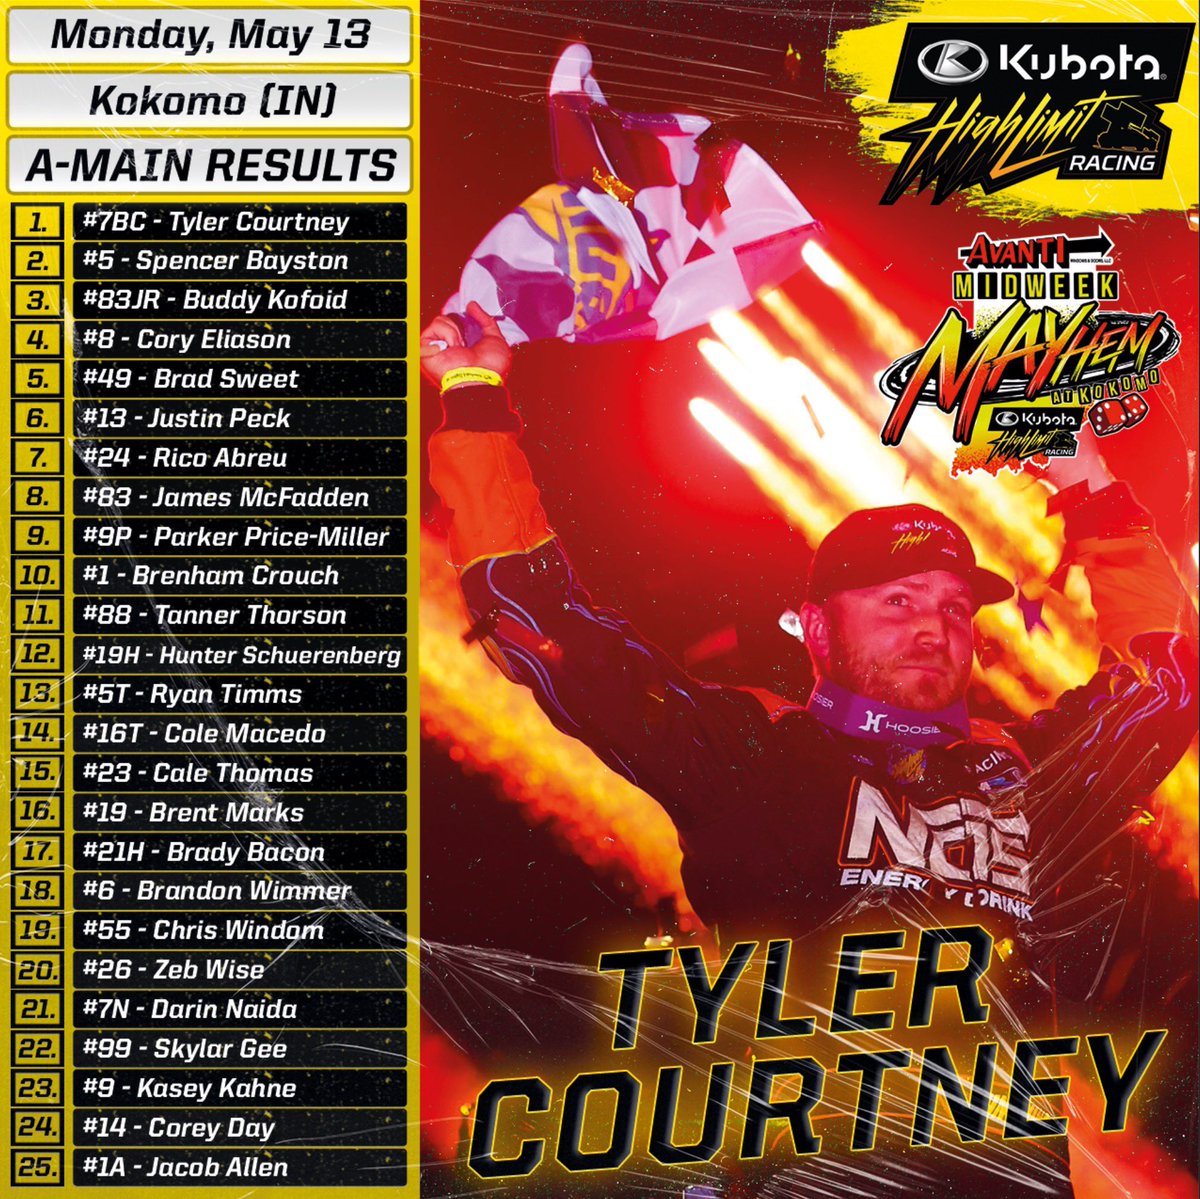 𝗜𝗖𝗬𝗠𝗜: There was nothin’ but Sunshine last night. Them Indiana boys on an Indiana night, @TyCourtney7BC and @SpencerBayston, led a 1-2 finish as the Hoosiers defended home turf at @KokomoSpeedway.